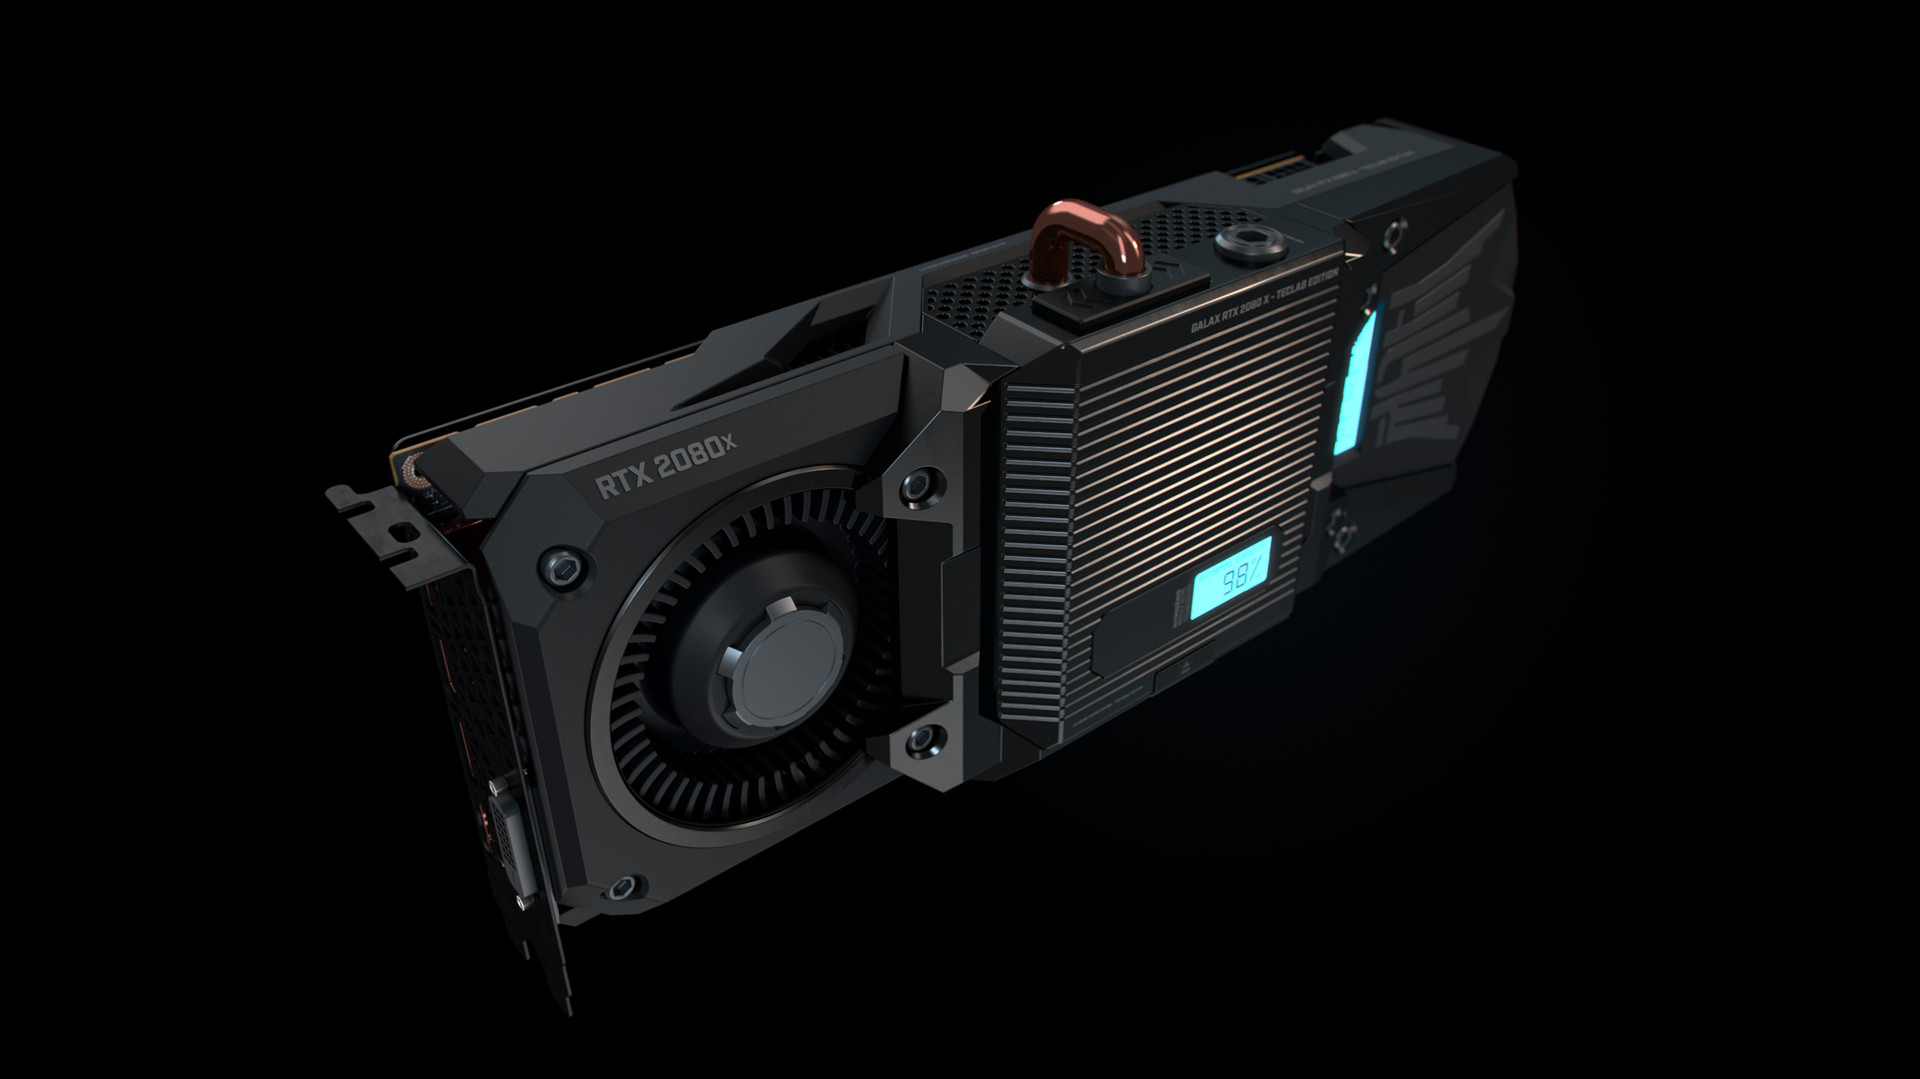 Wanderson Magalhães - Concept GPU - Graphics Card - [Galax]